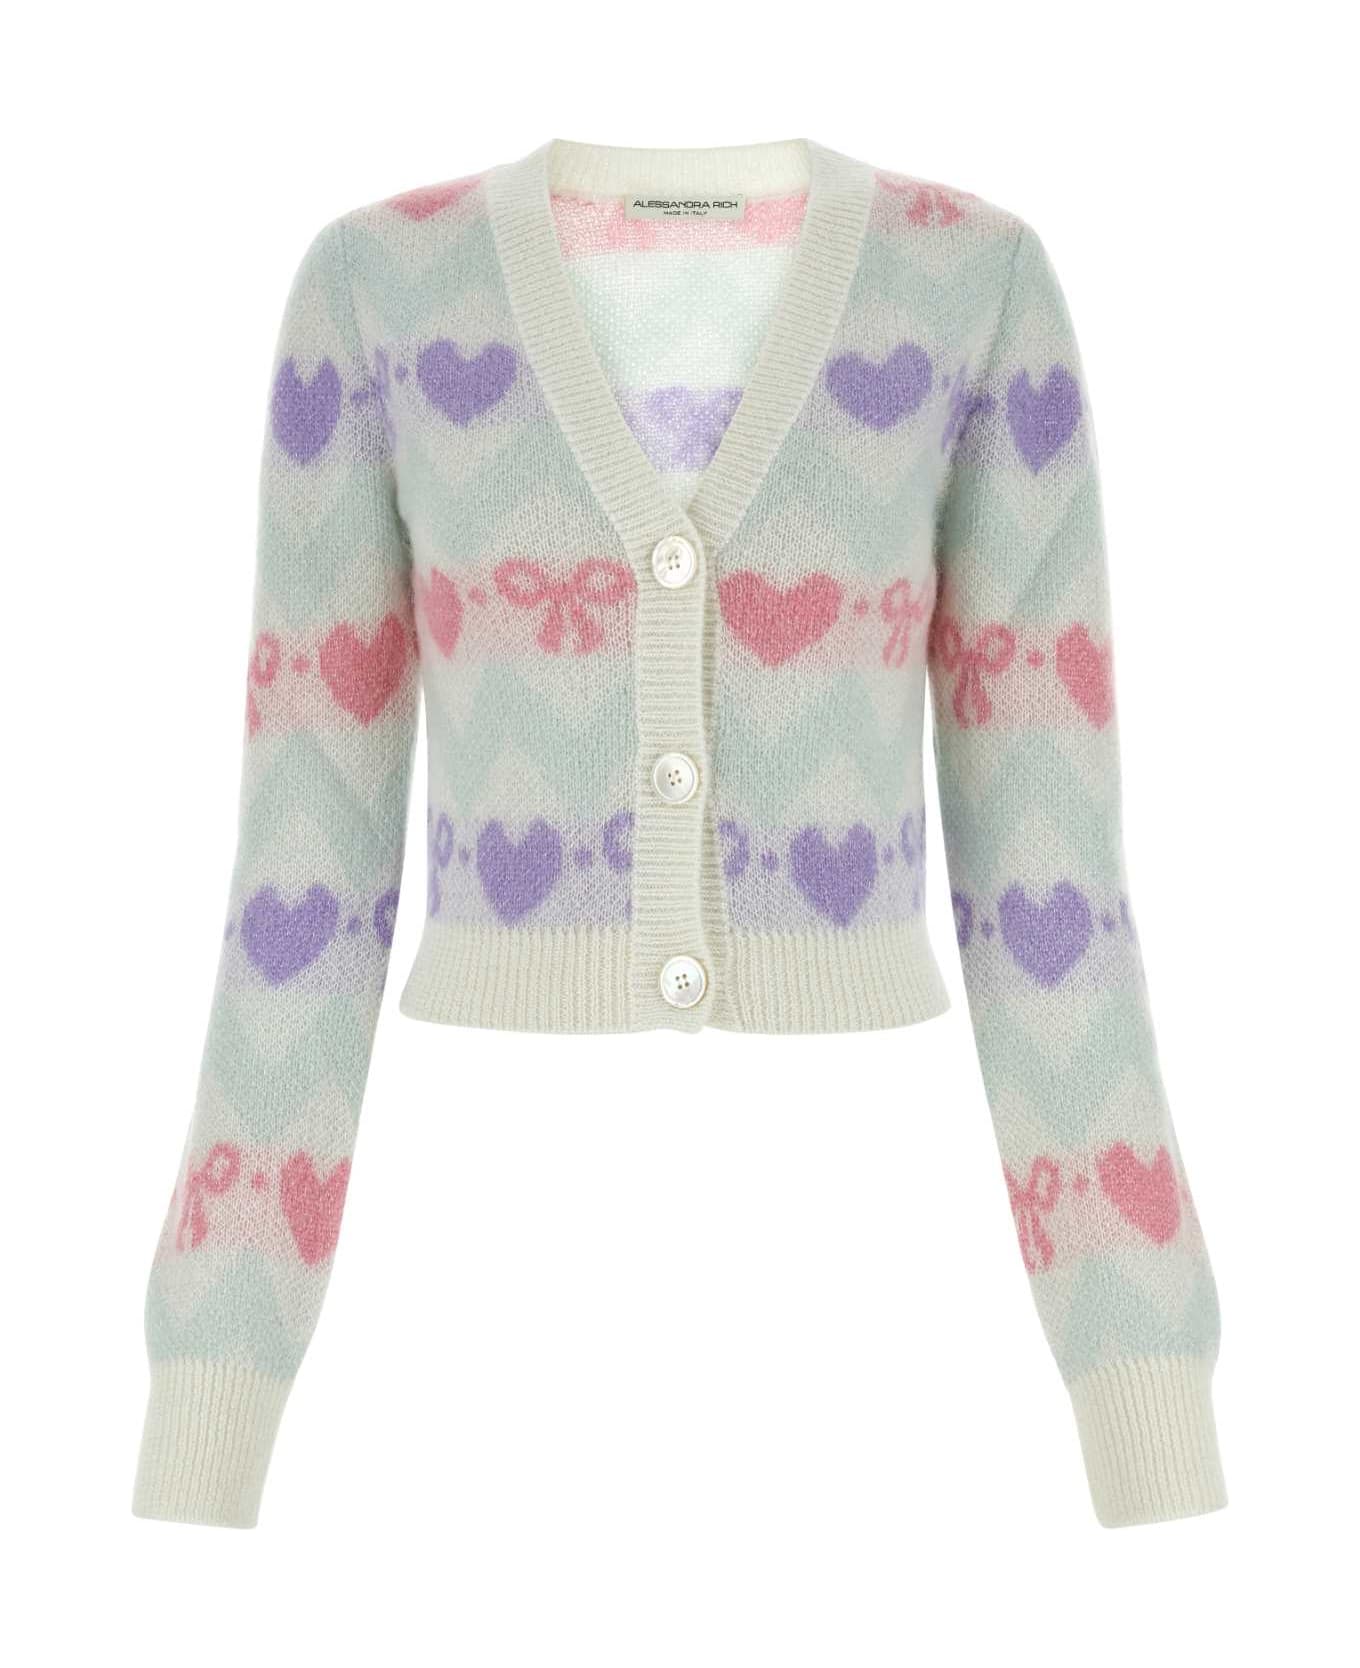 Alessandra Rich Multicolor Mohair Blend Cardigan - WHITE